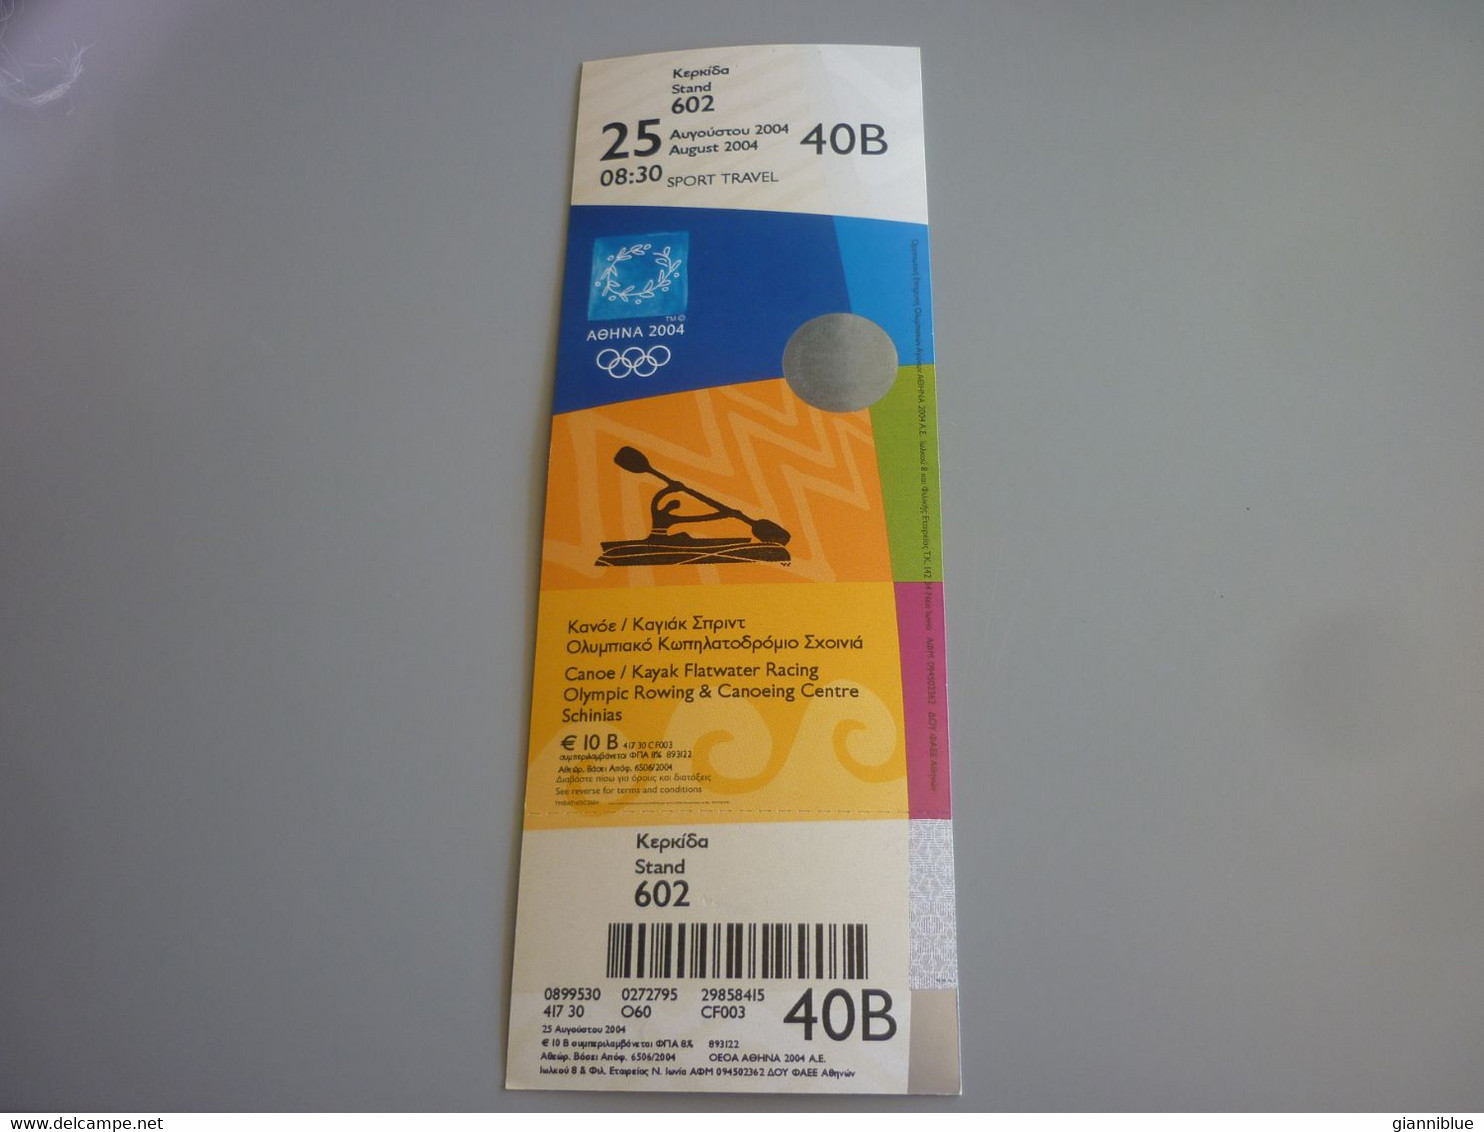 Canoe Kayak Flatwater Racing Athens 2004 Olympic Games Greece Greek Mint Unused Match Ticket Stub 25/08/2004 08:30 #40B - Apparel, Souvenirs & Other